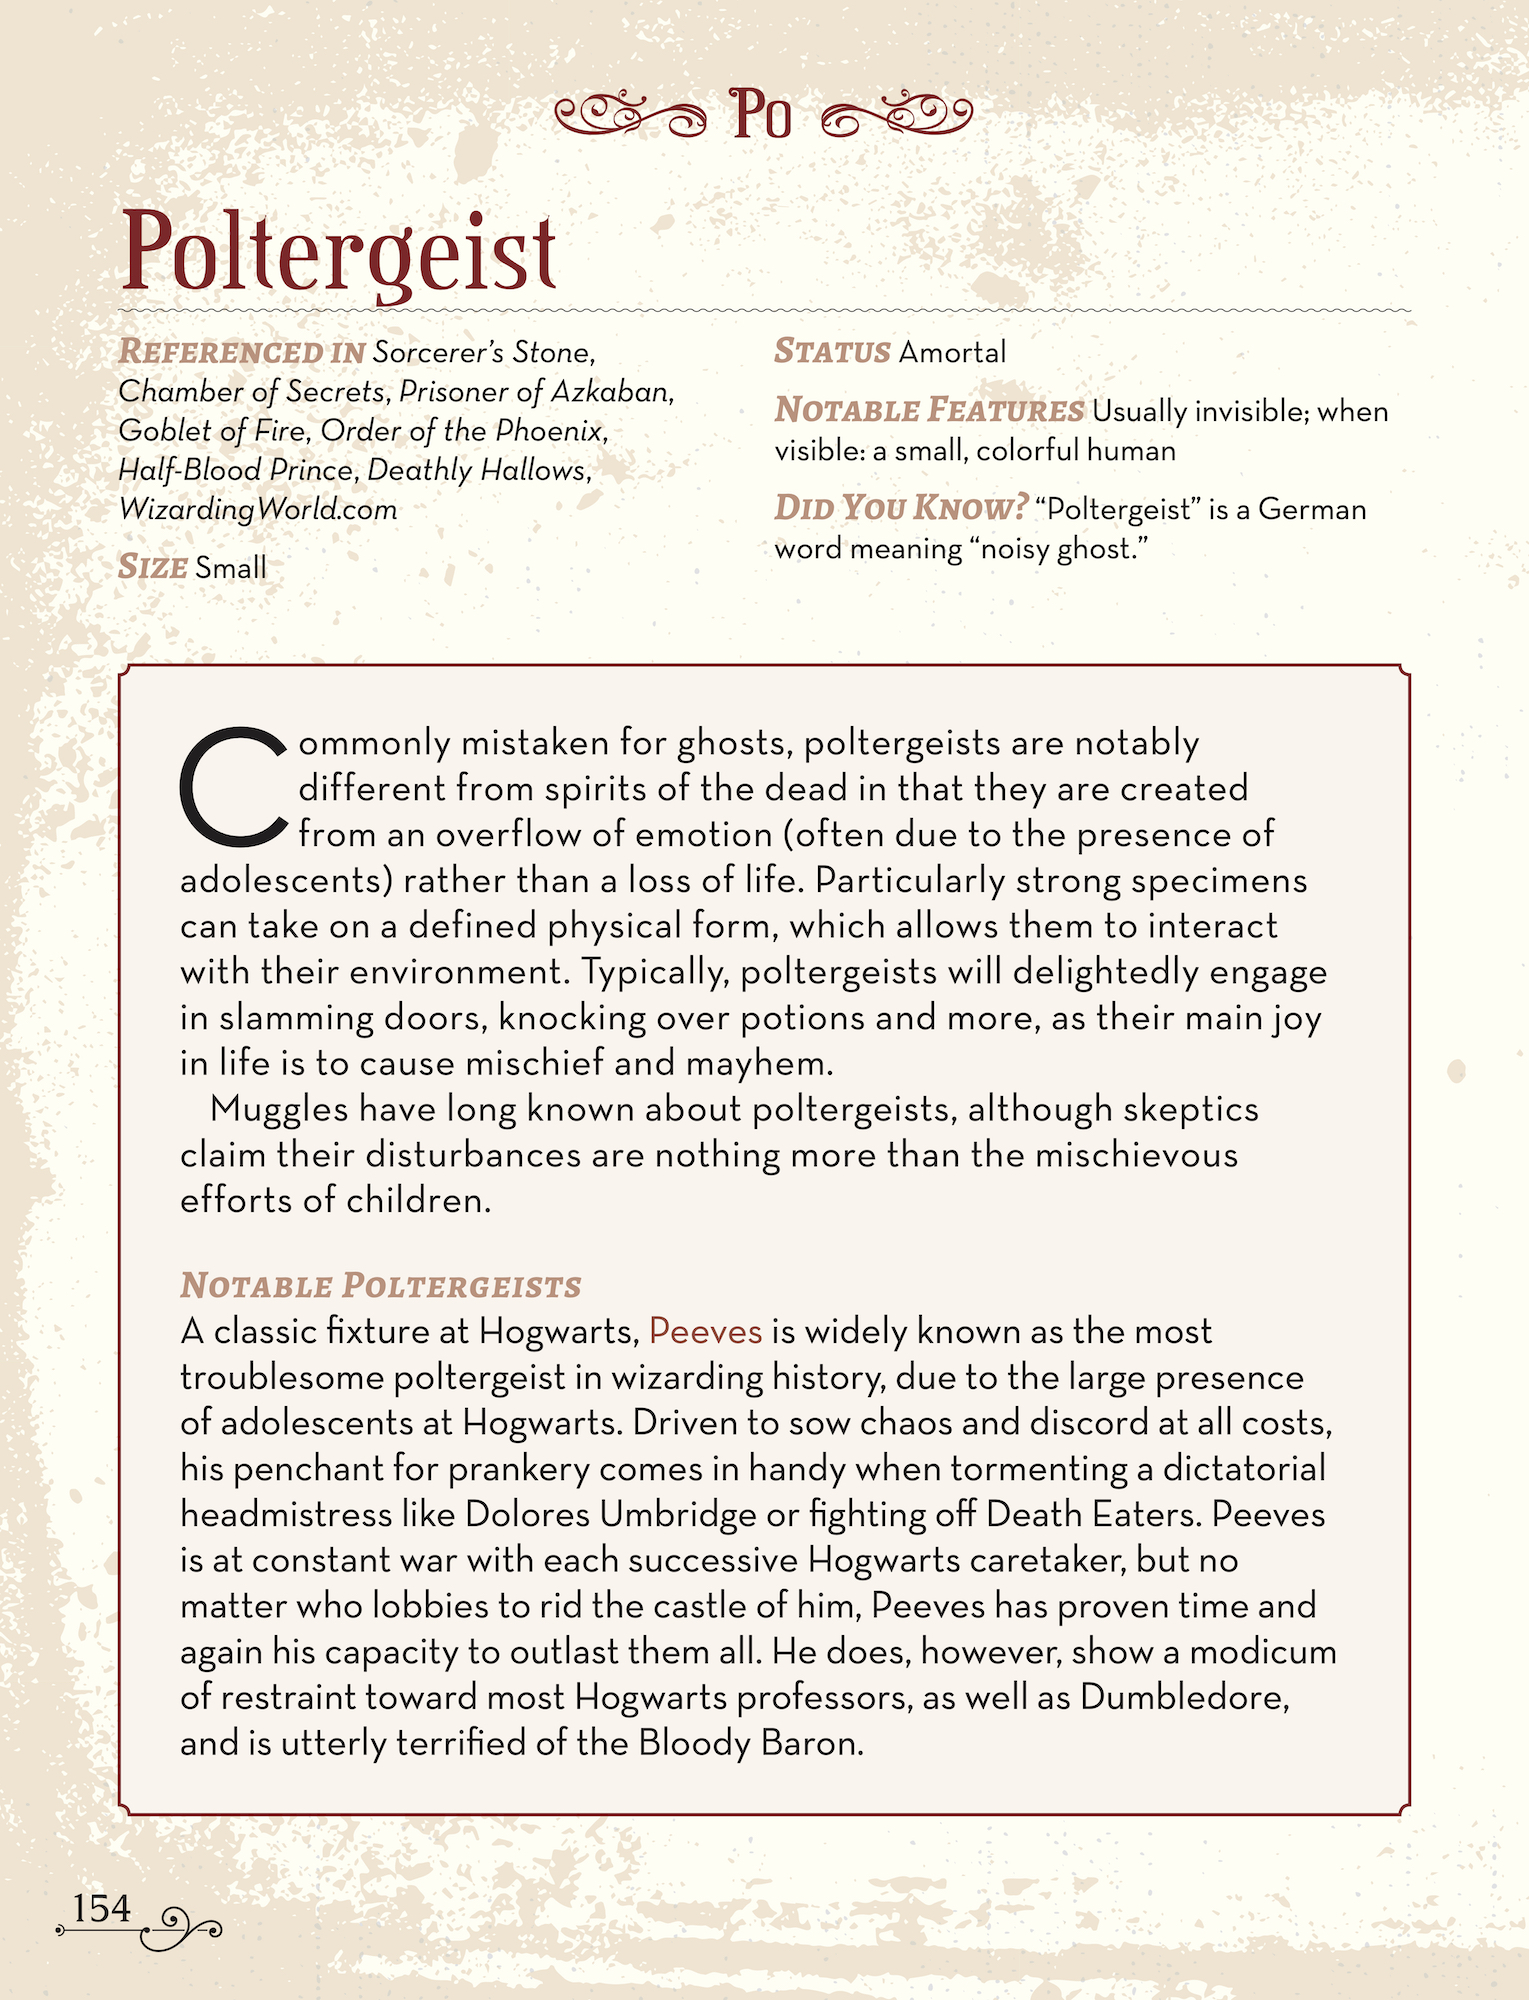 Poltergeist page from “The Unofficial Harry Potter Bestiary”